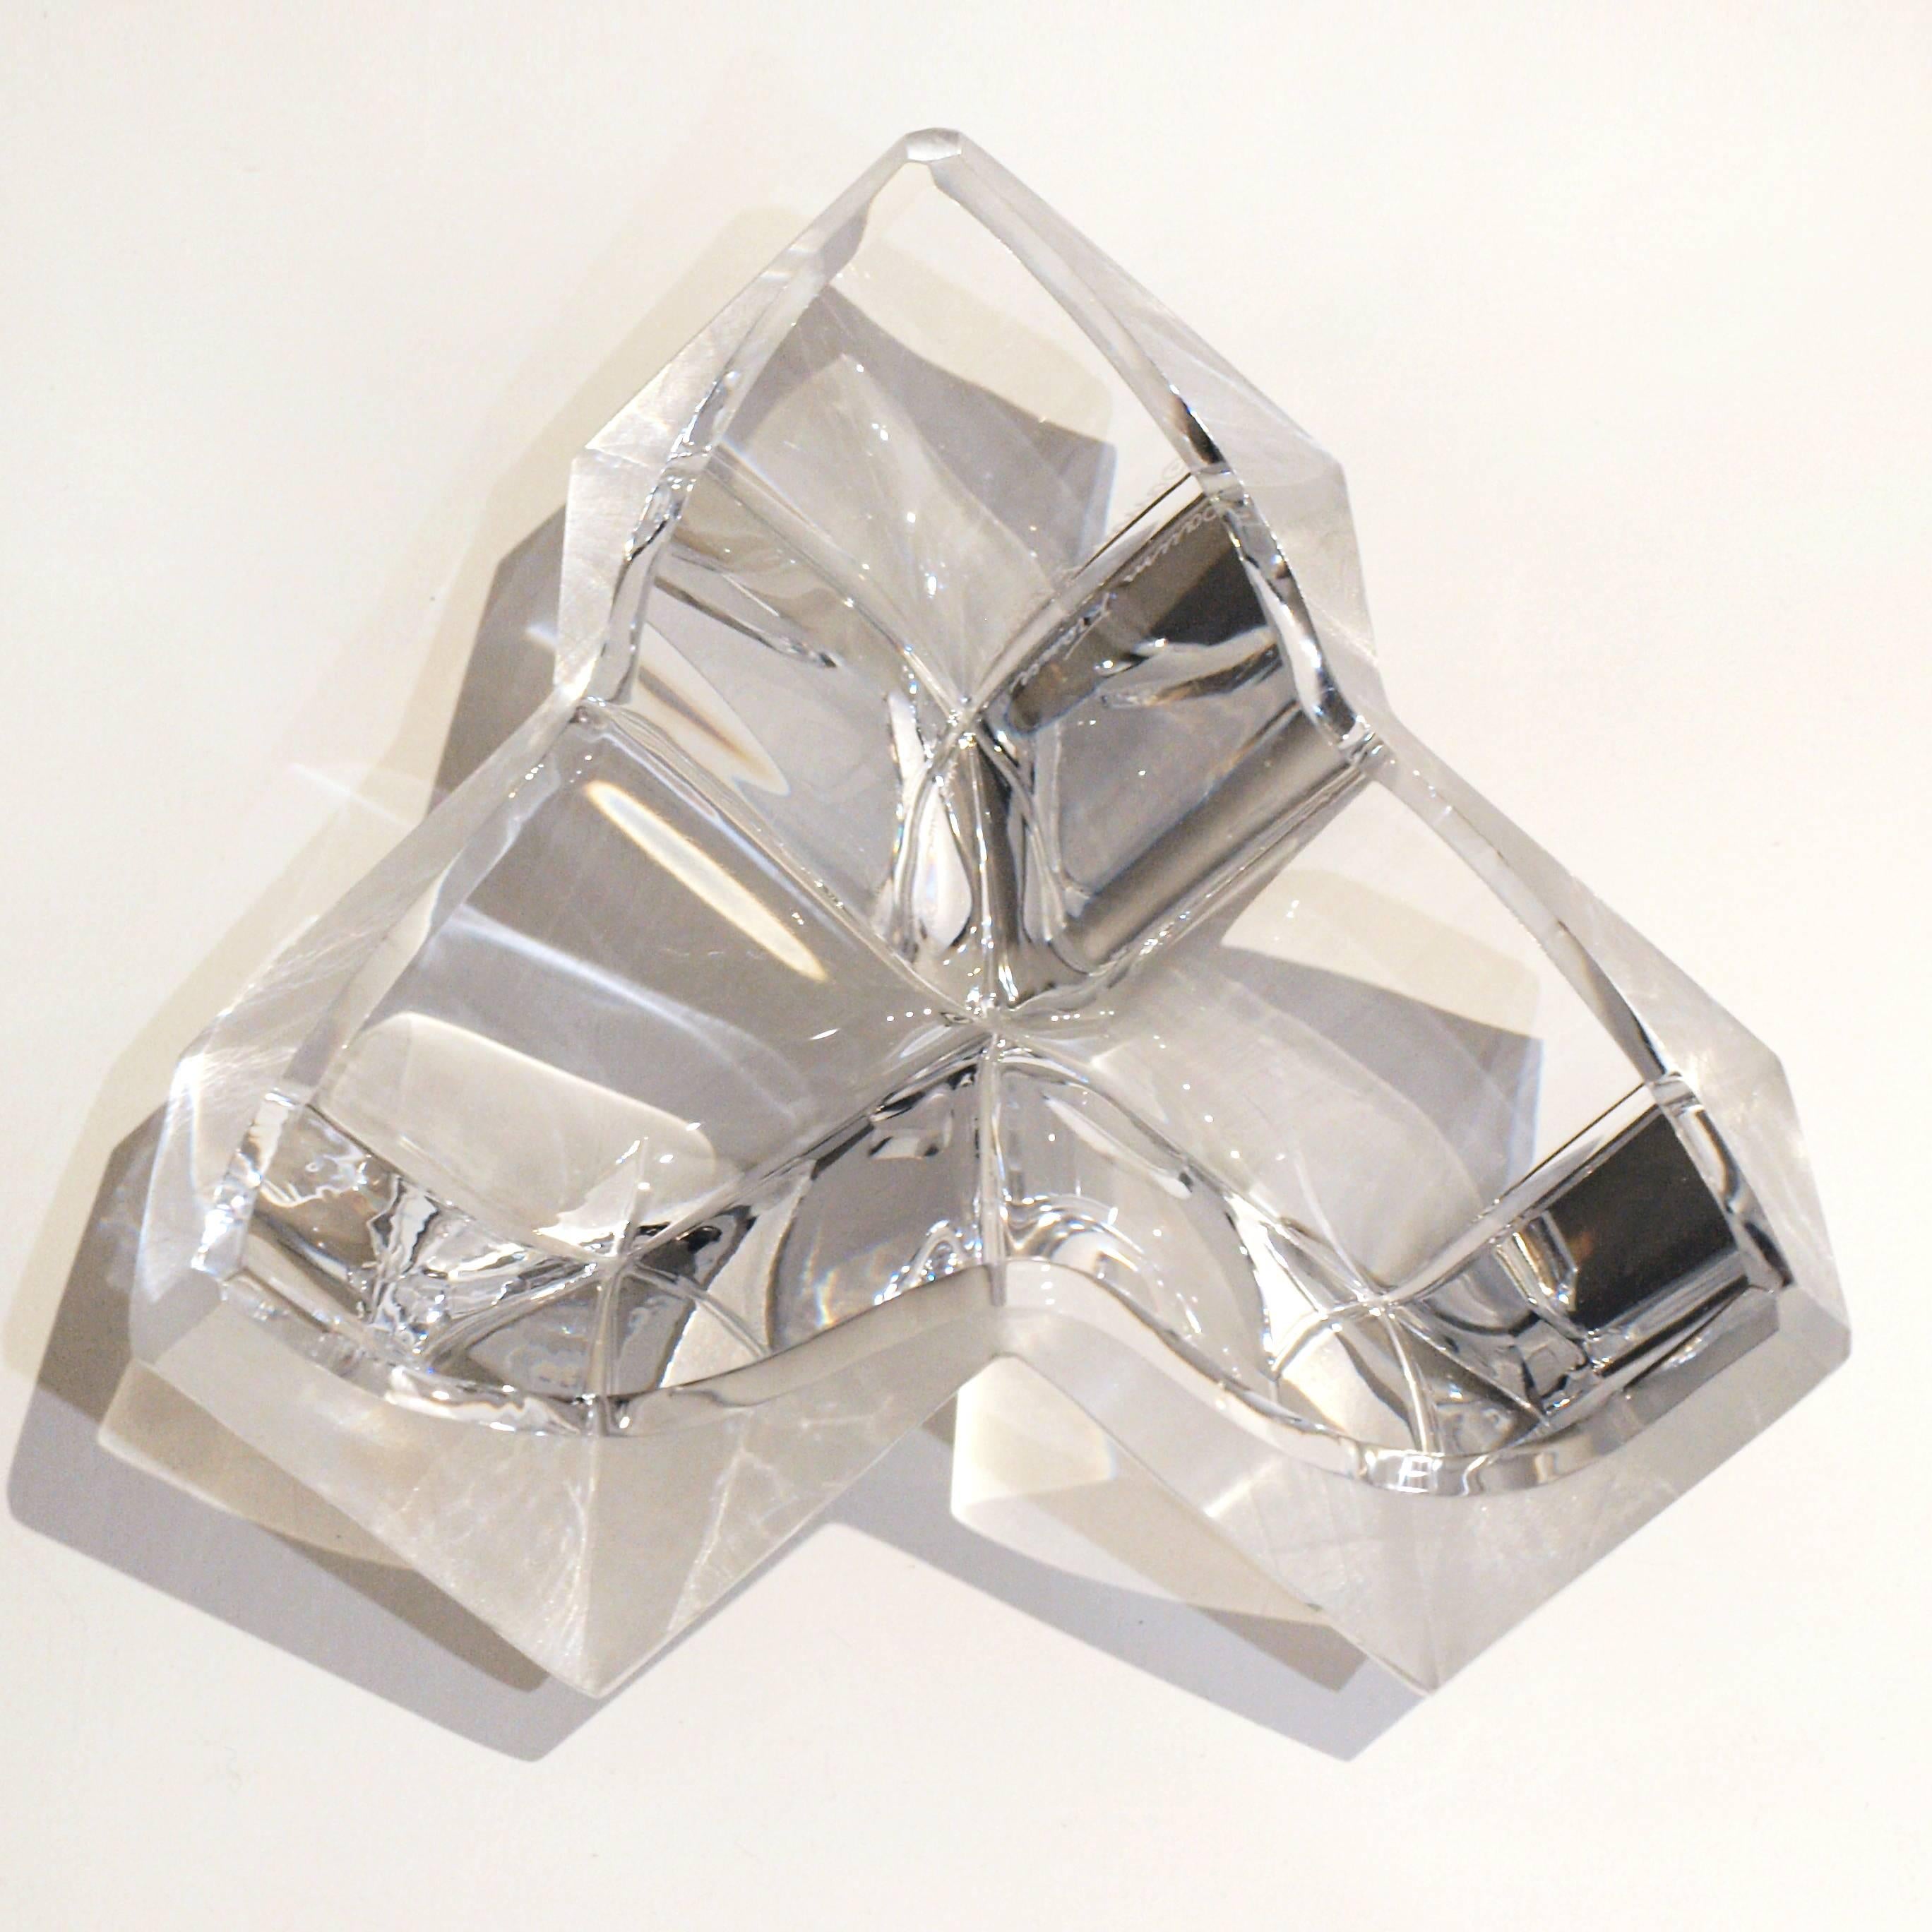 A crystal Daum centrepiece comprising of three open geometric cubes with a frosted edged. Signed Daum France to the side.